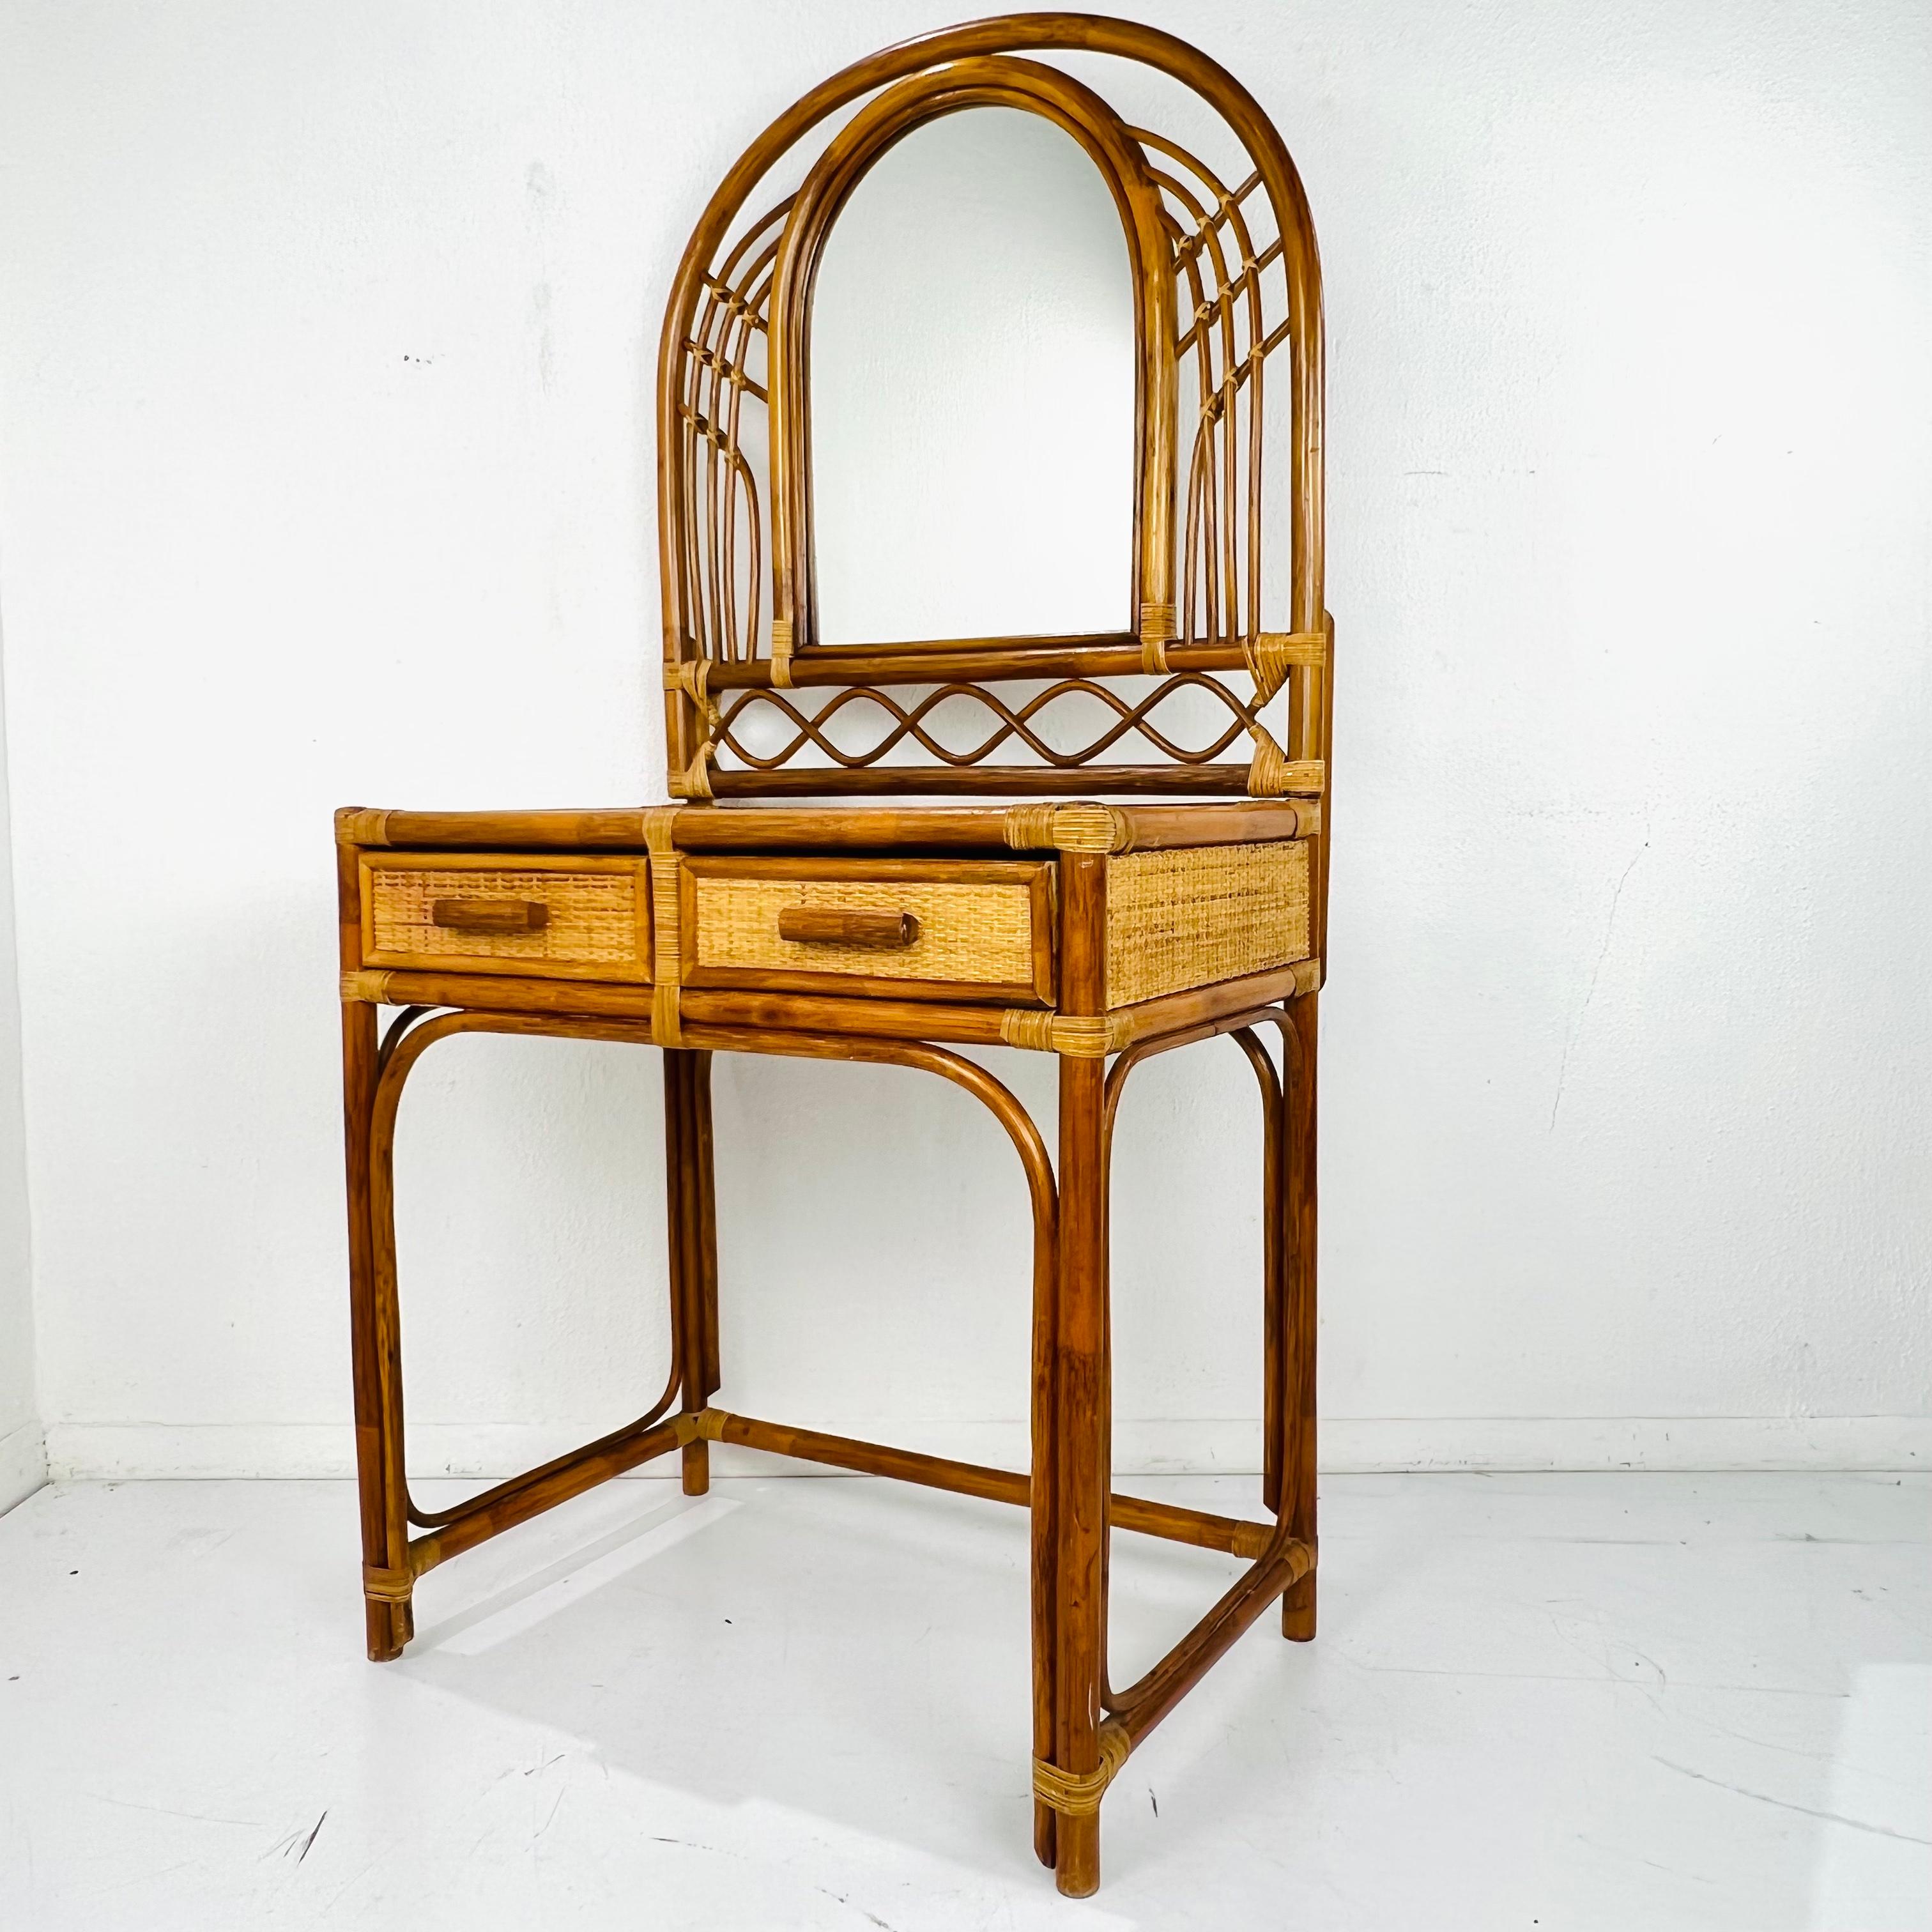 Super cute 1970s rattan vanity, consisting of a table with two drawer and arched mirror. Fits perfectly in a midcentury or Bohemian style home. Very good vintage condition with some minor signs of age and use. 